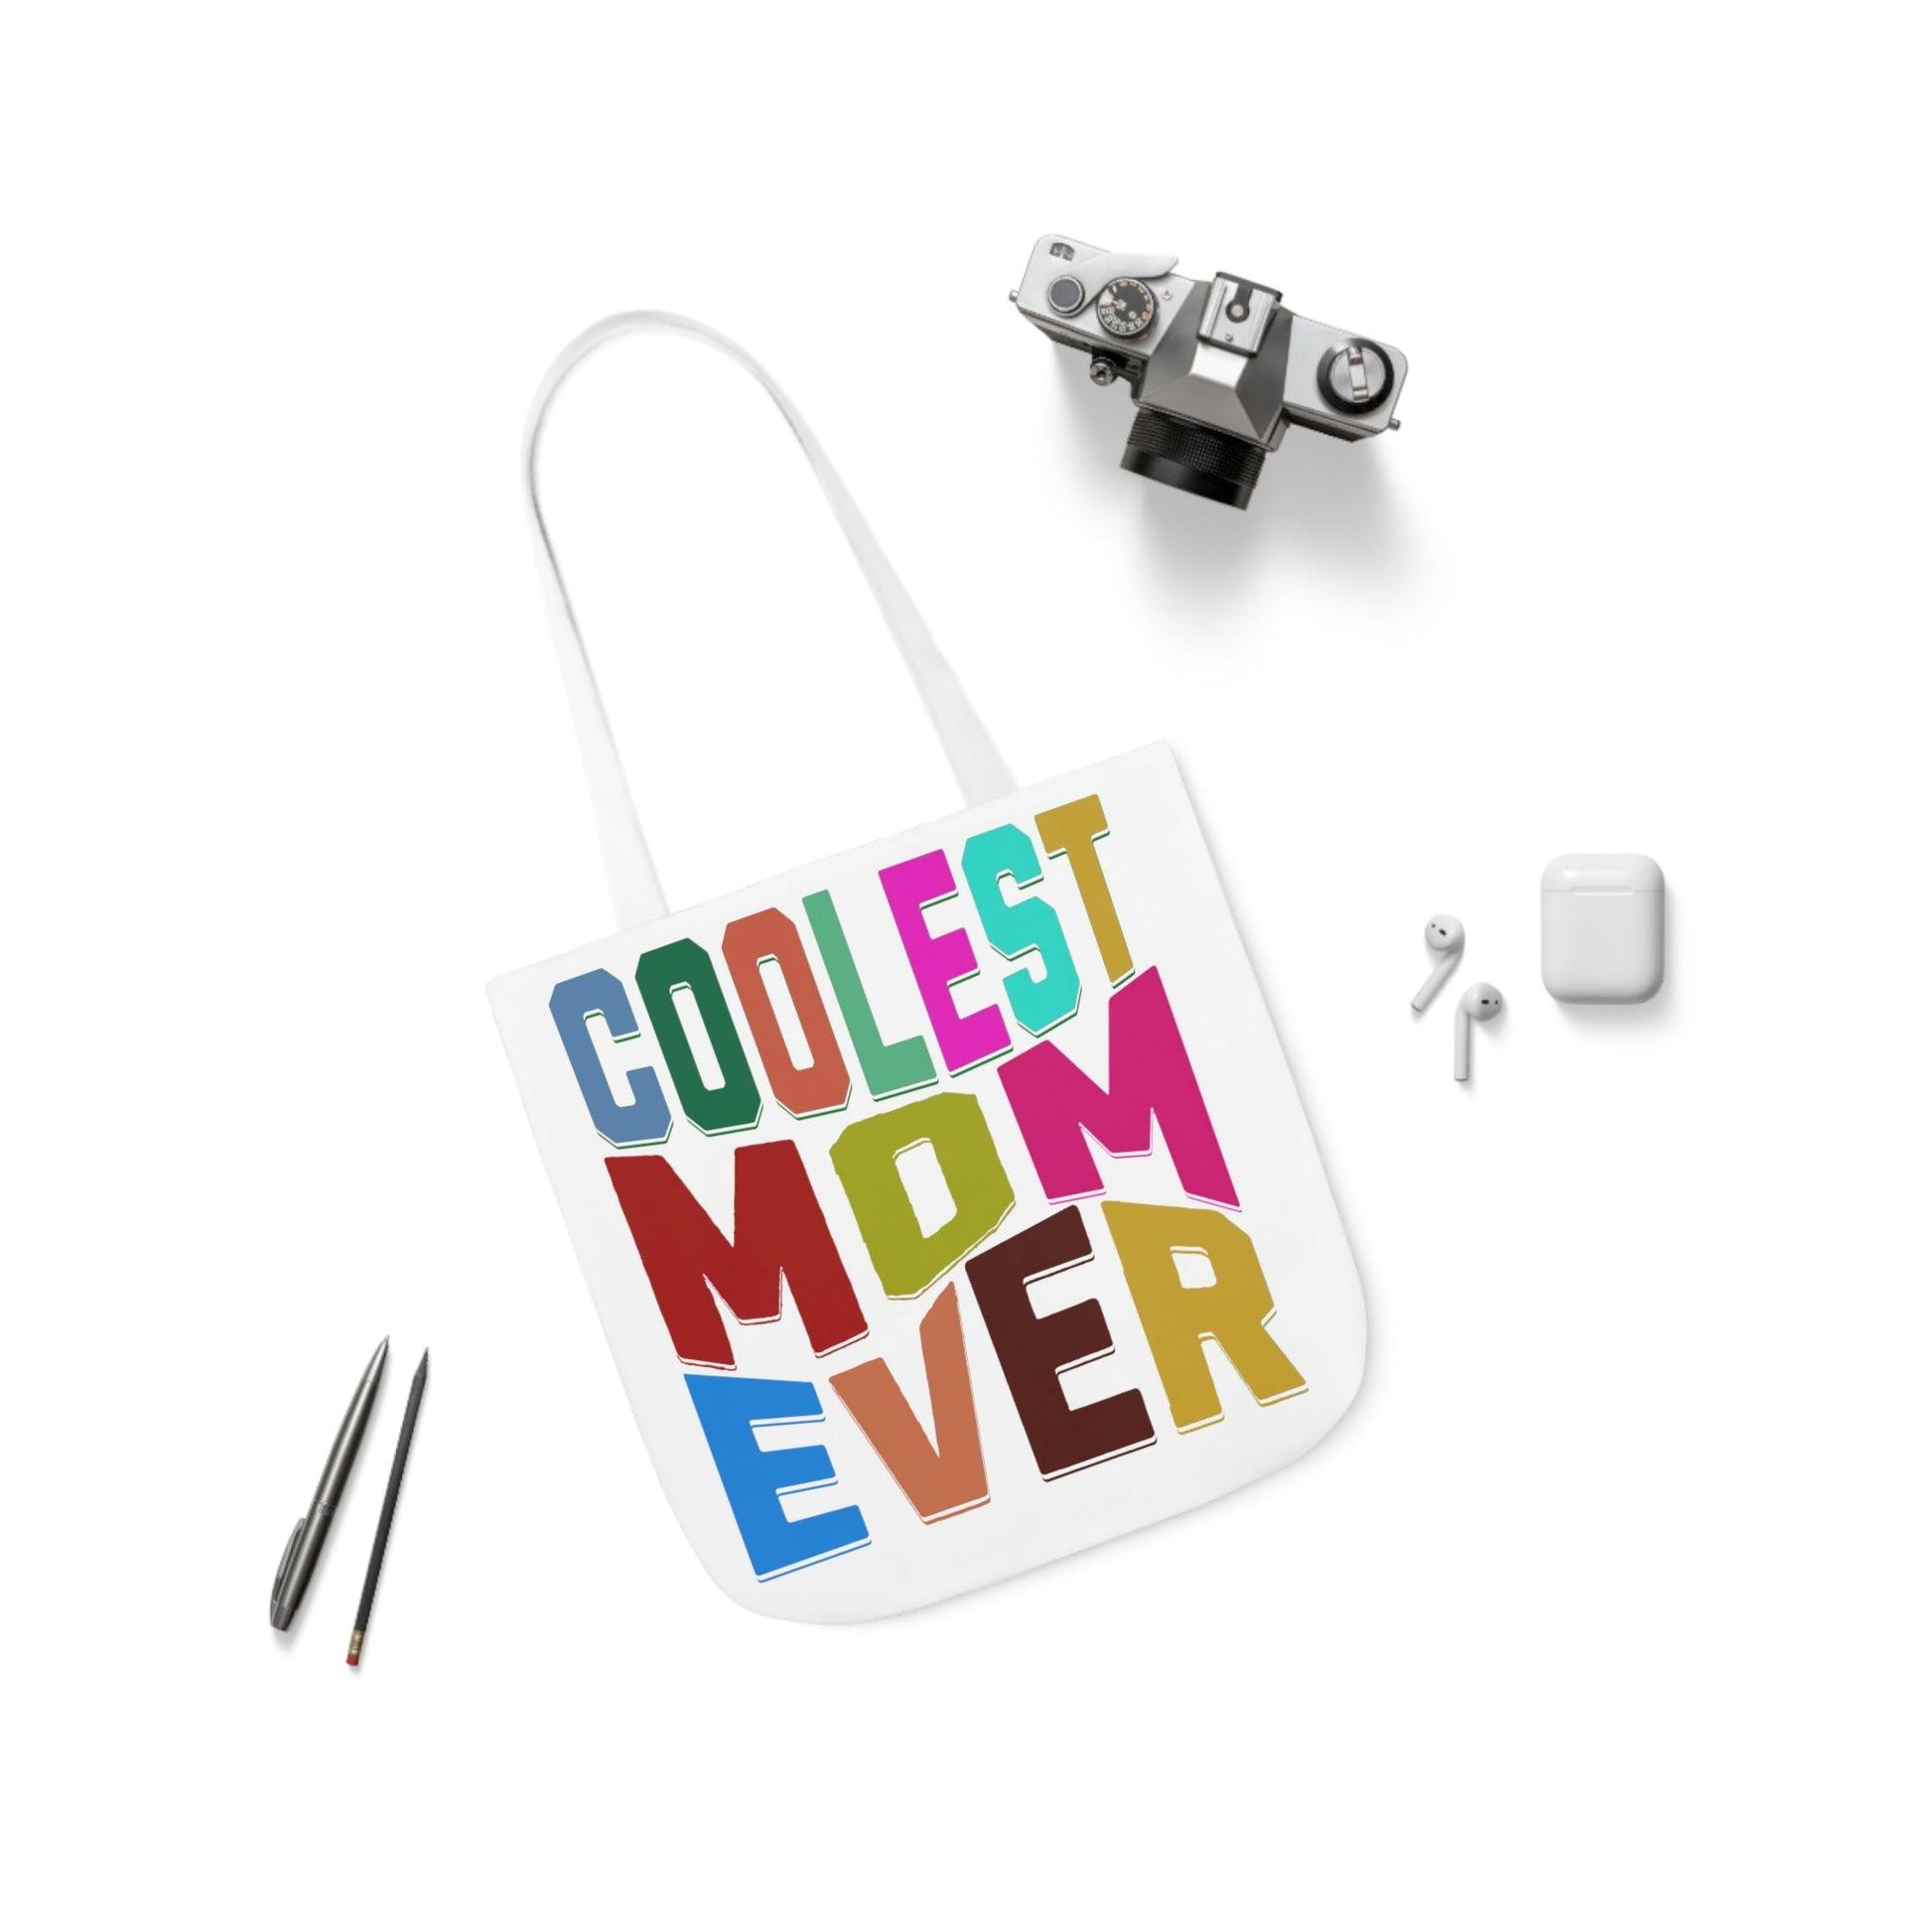 The coolest mom ever Canvas Tote Bag - Giftsmojo